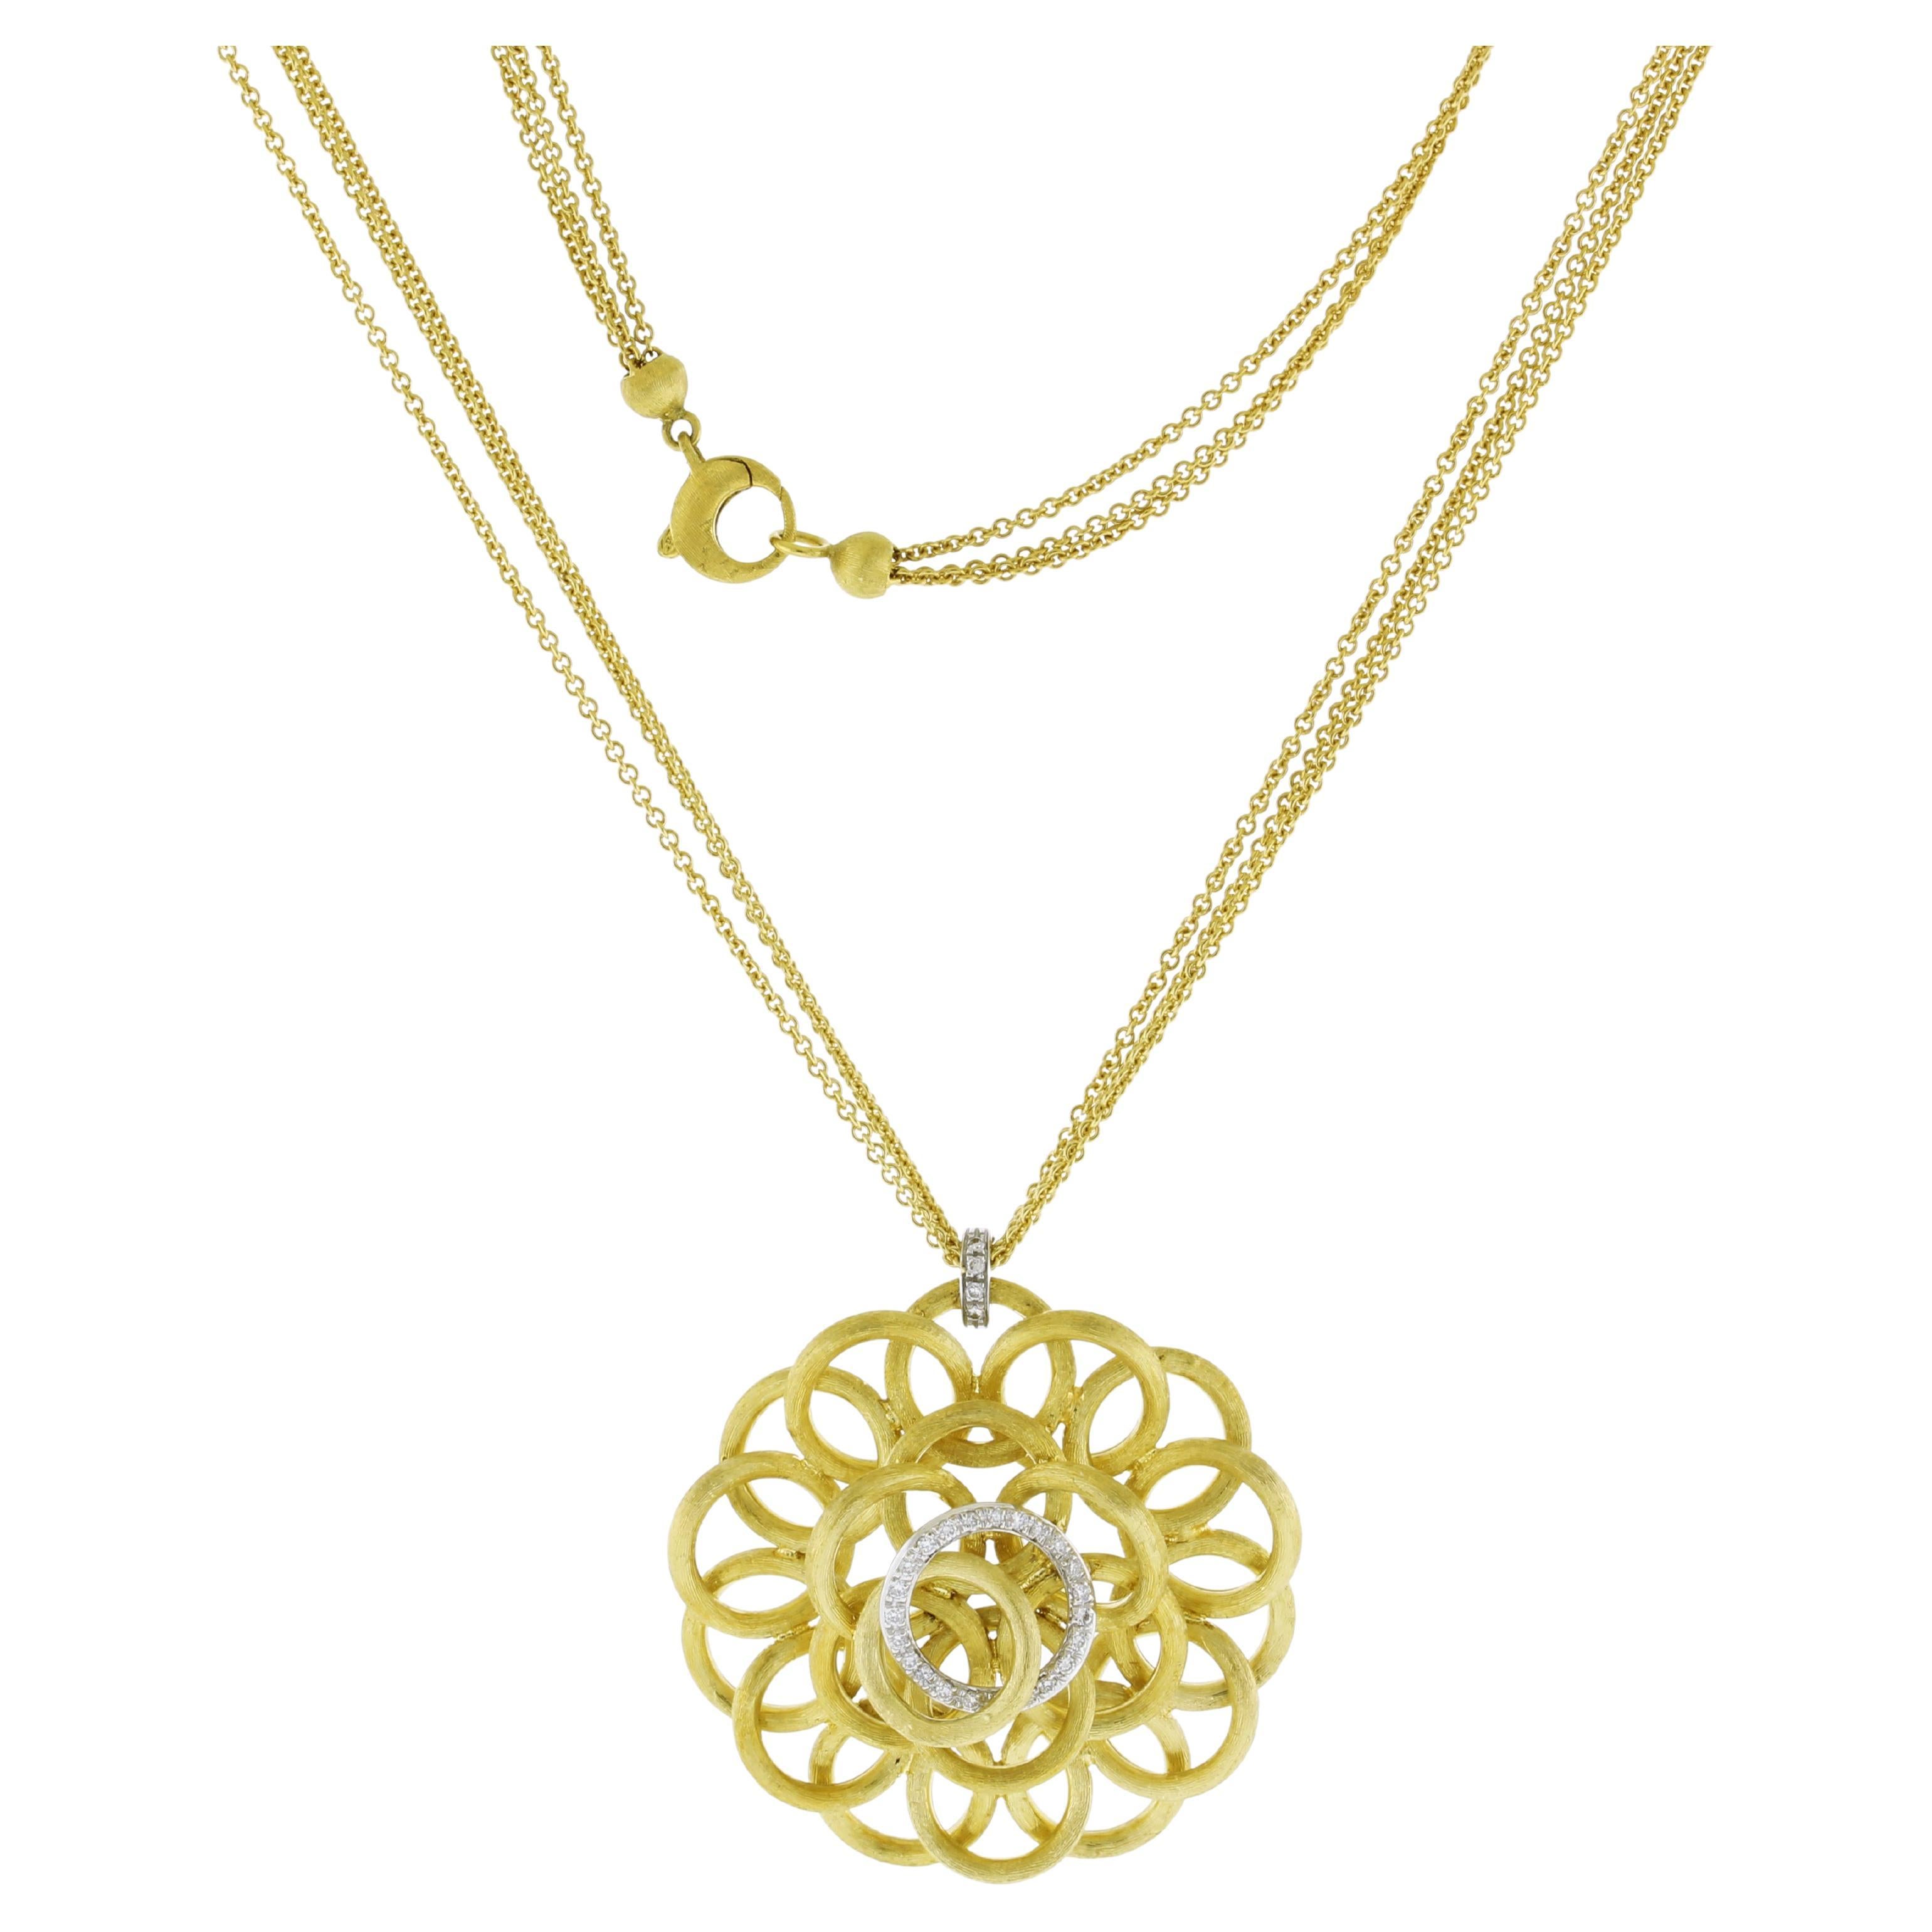 Marco Bicego Jaipur Gold and Diamond Pendant Necklace